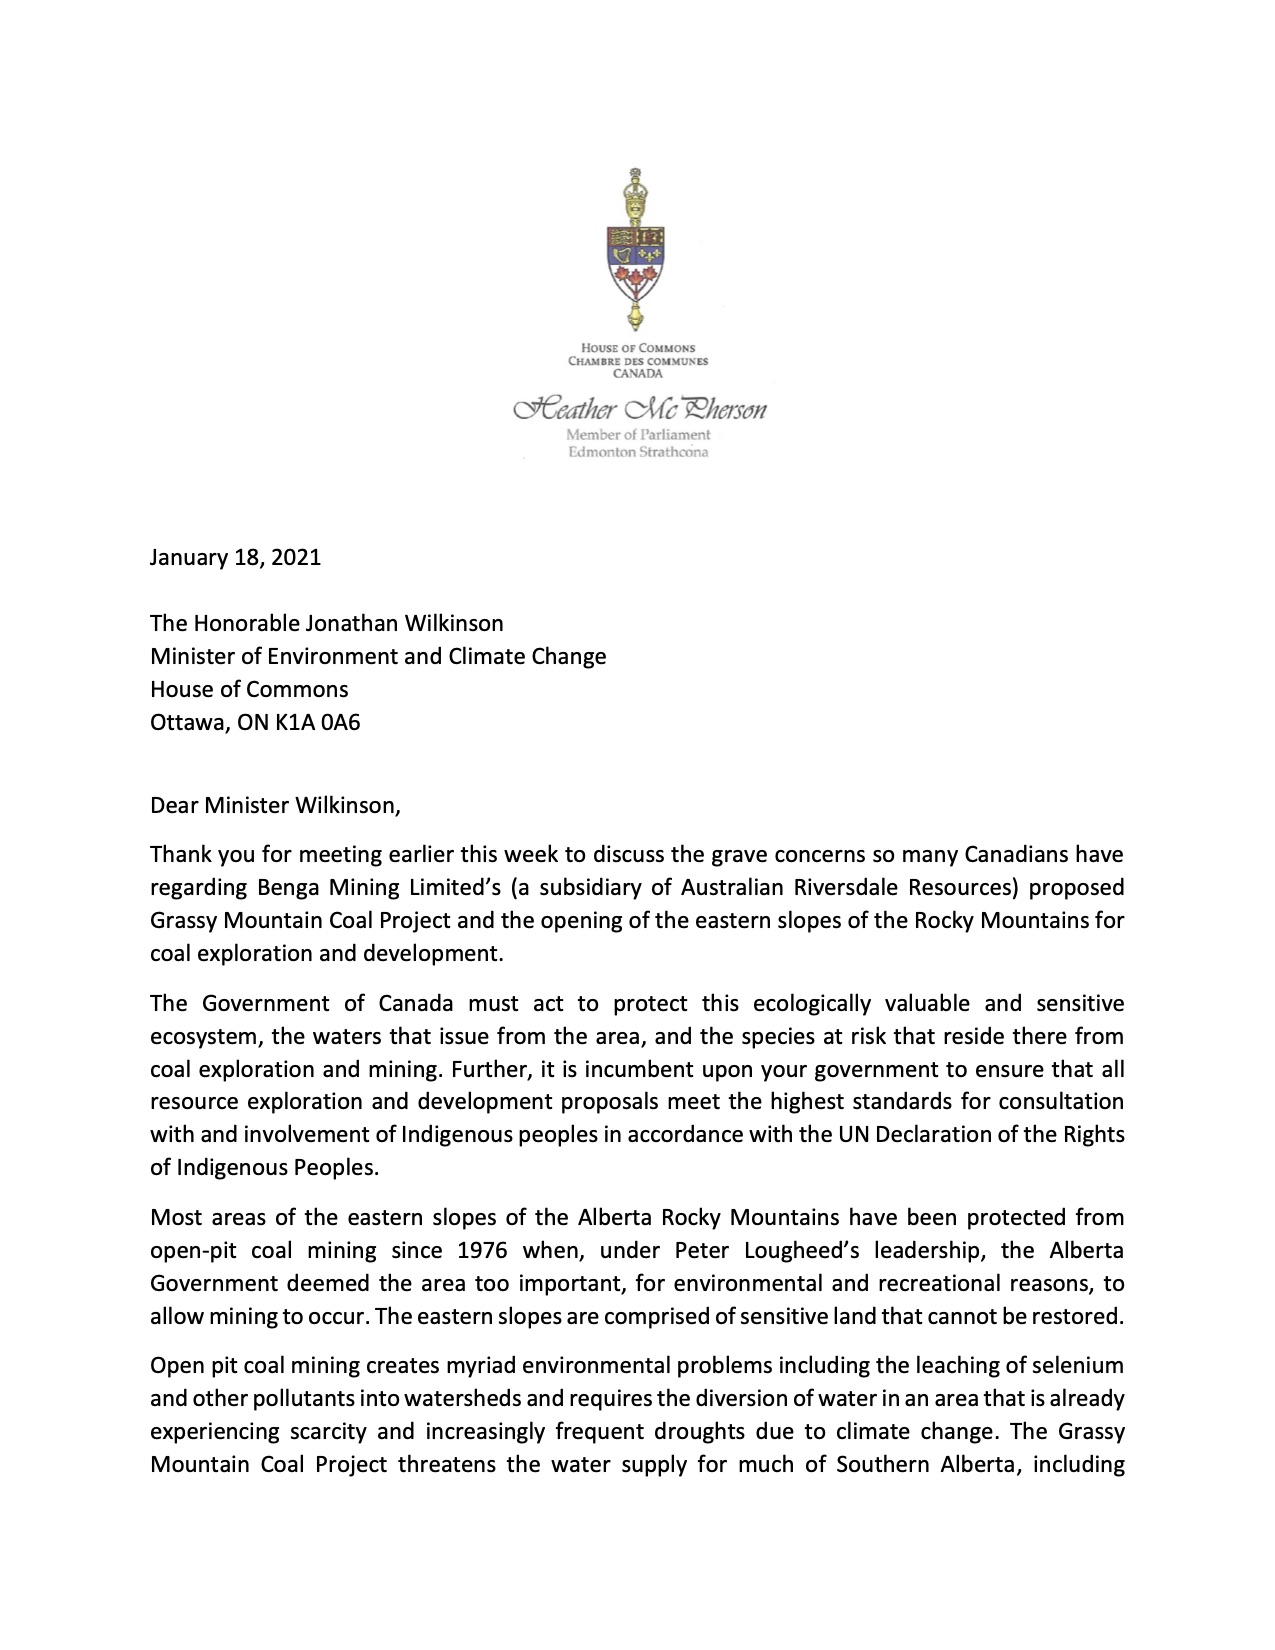 Letter to Minister Wilkinson, Page 1